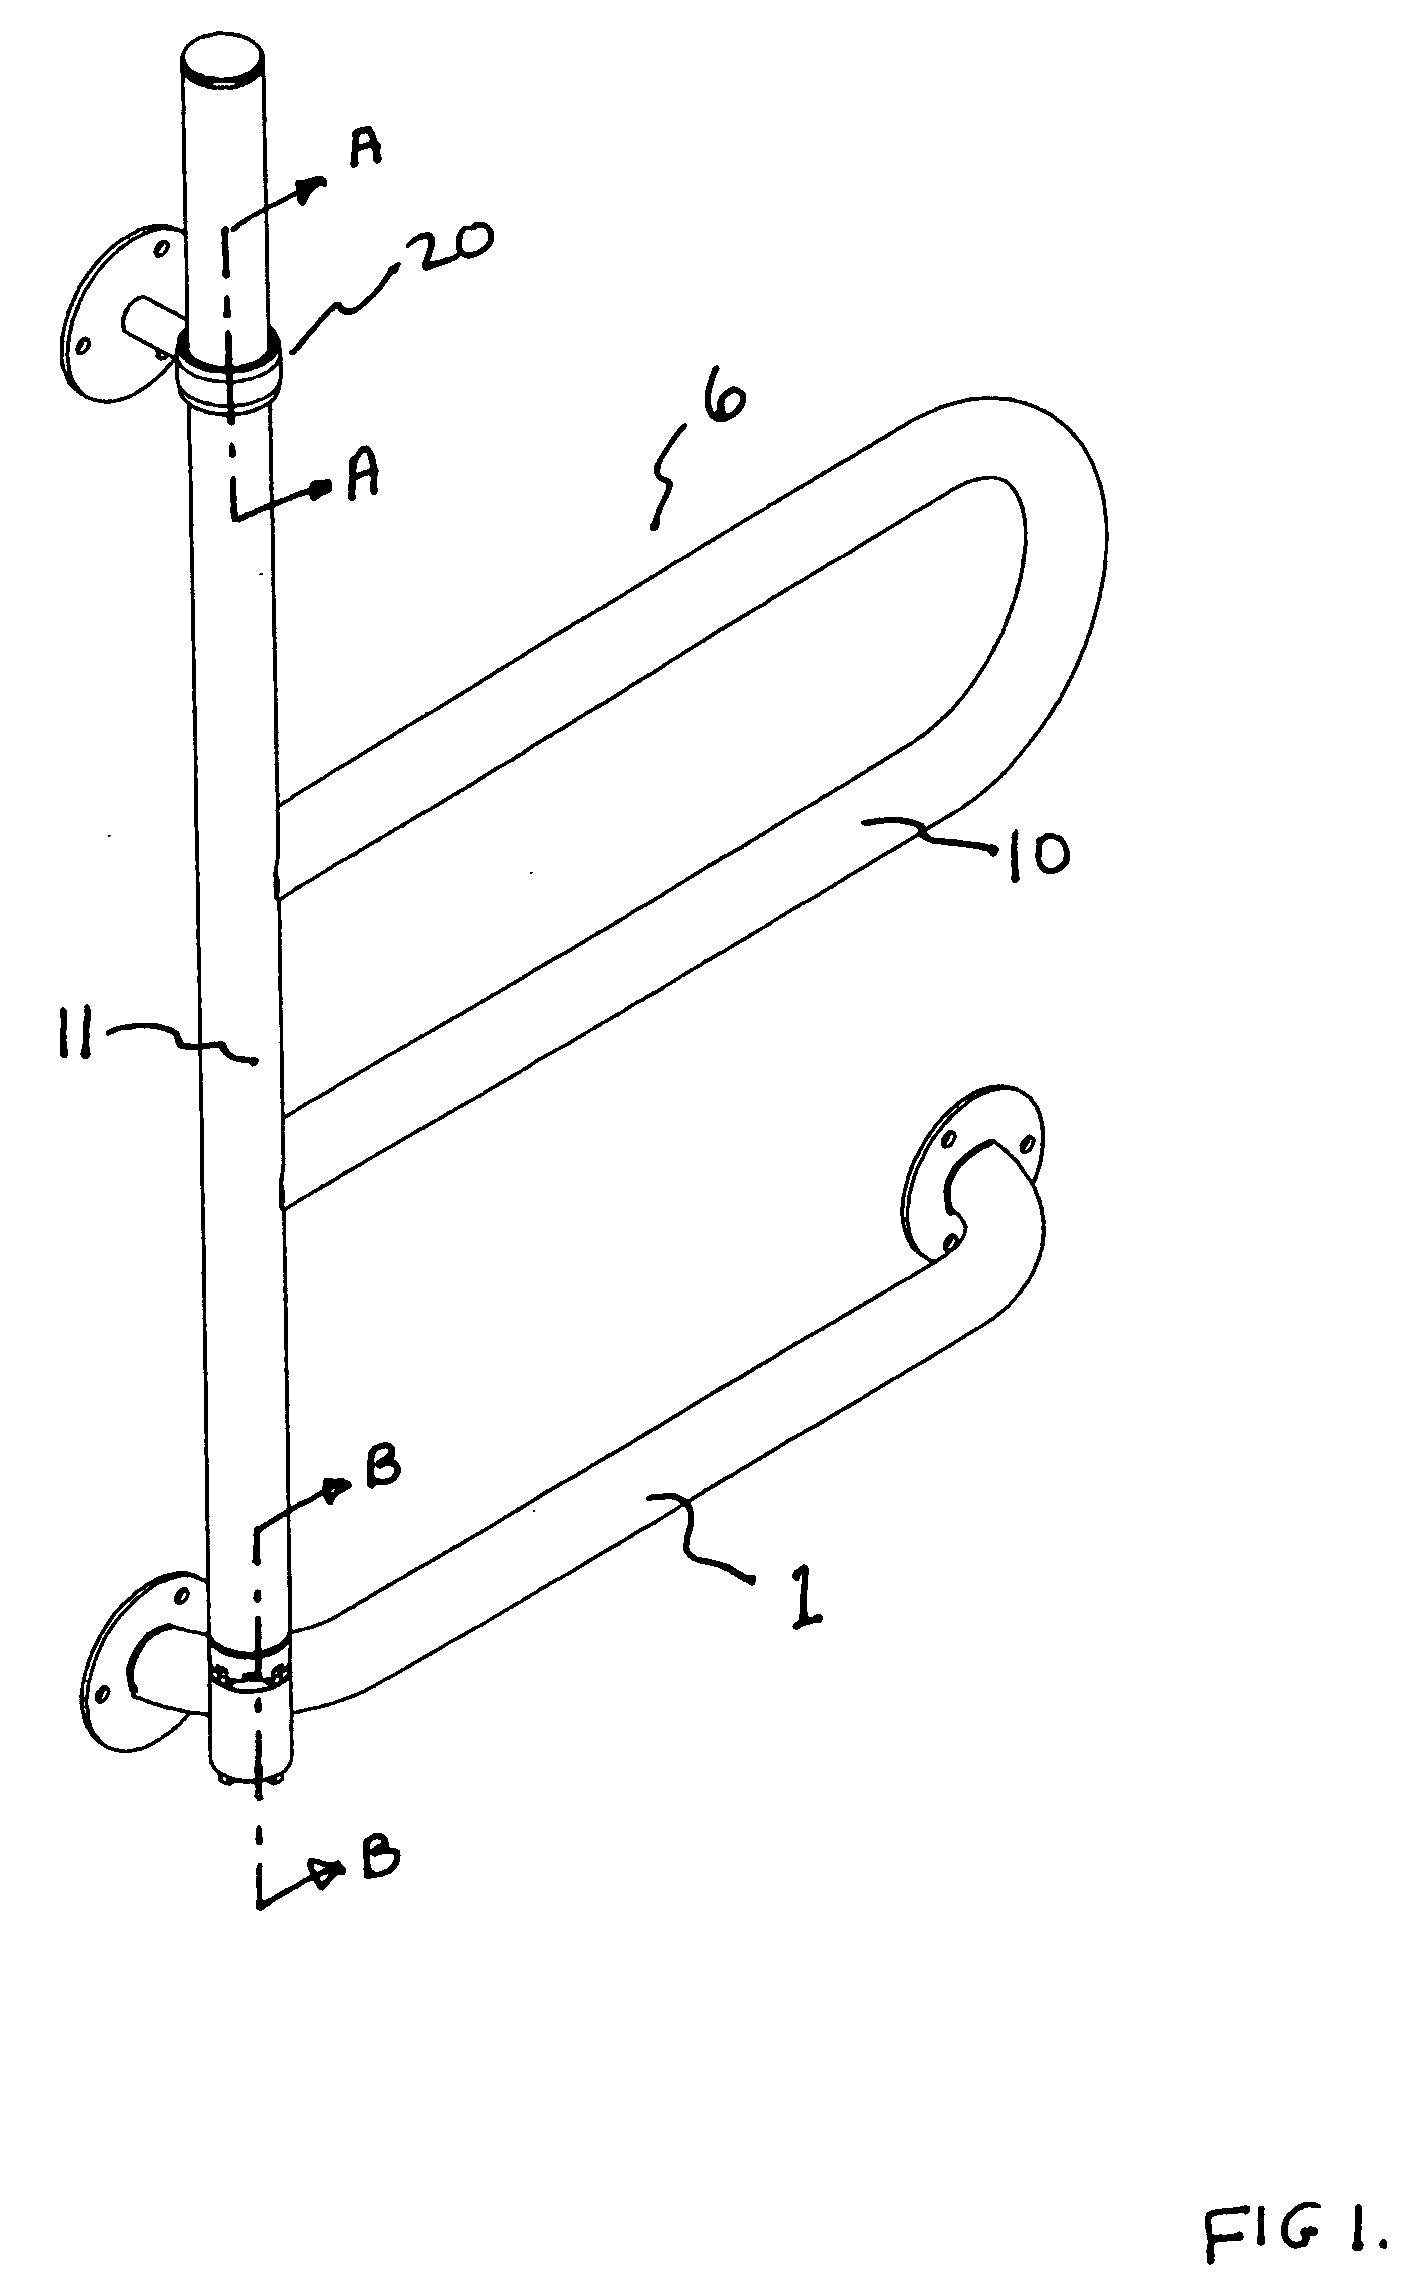 Pivoting and locking wall mounted support rail for elderly & disabled persons